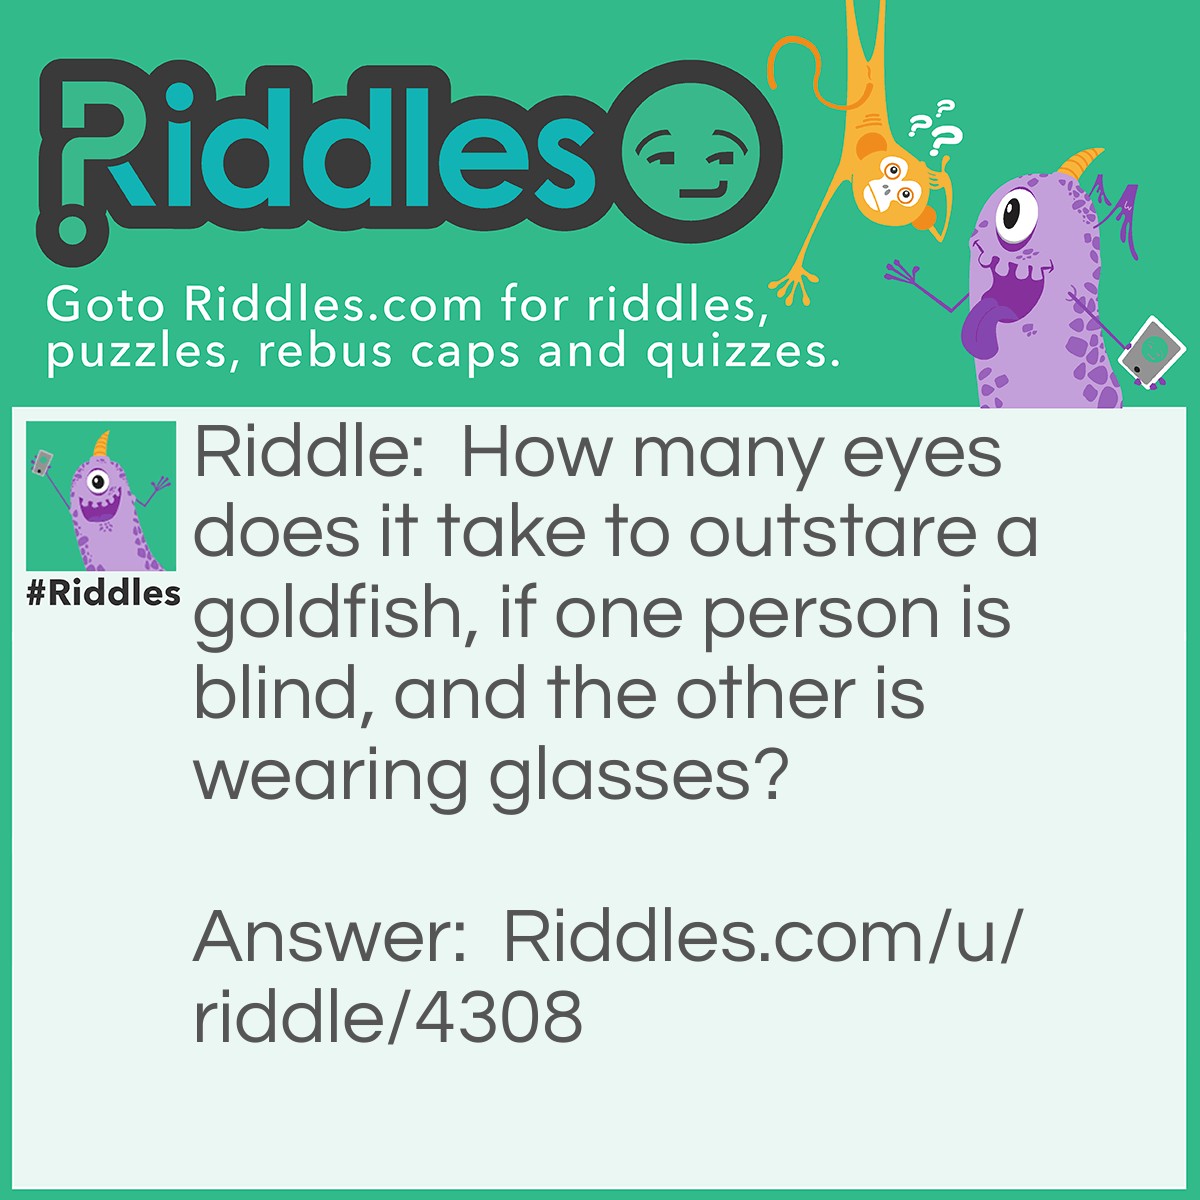 Riddle: How many eyes does it take to outstare a goldfish, if one person is blind, and the other is wearing glasses? Answer: None, in order to stare, you have to see, but if you were wearing glasses you would just be staring at the glass. So in order to outstare a gold fish, you would have to have no eyelids, which would be impossible for the eye to function properly.